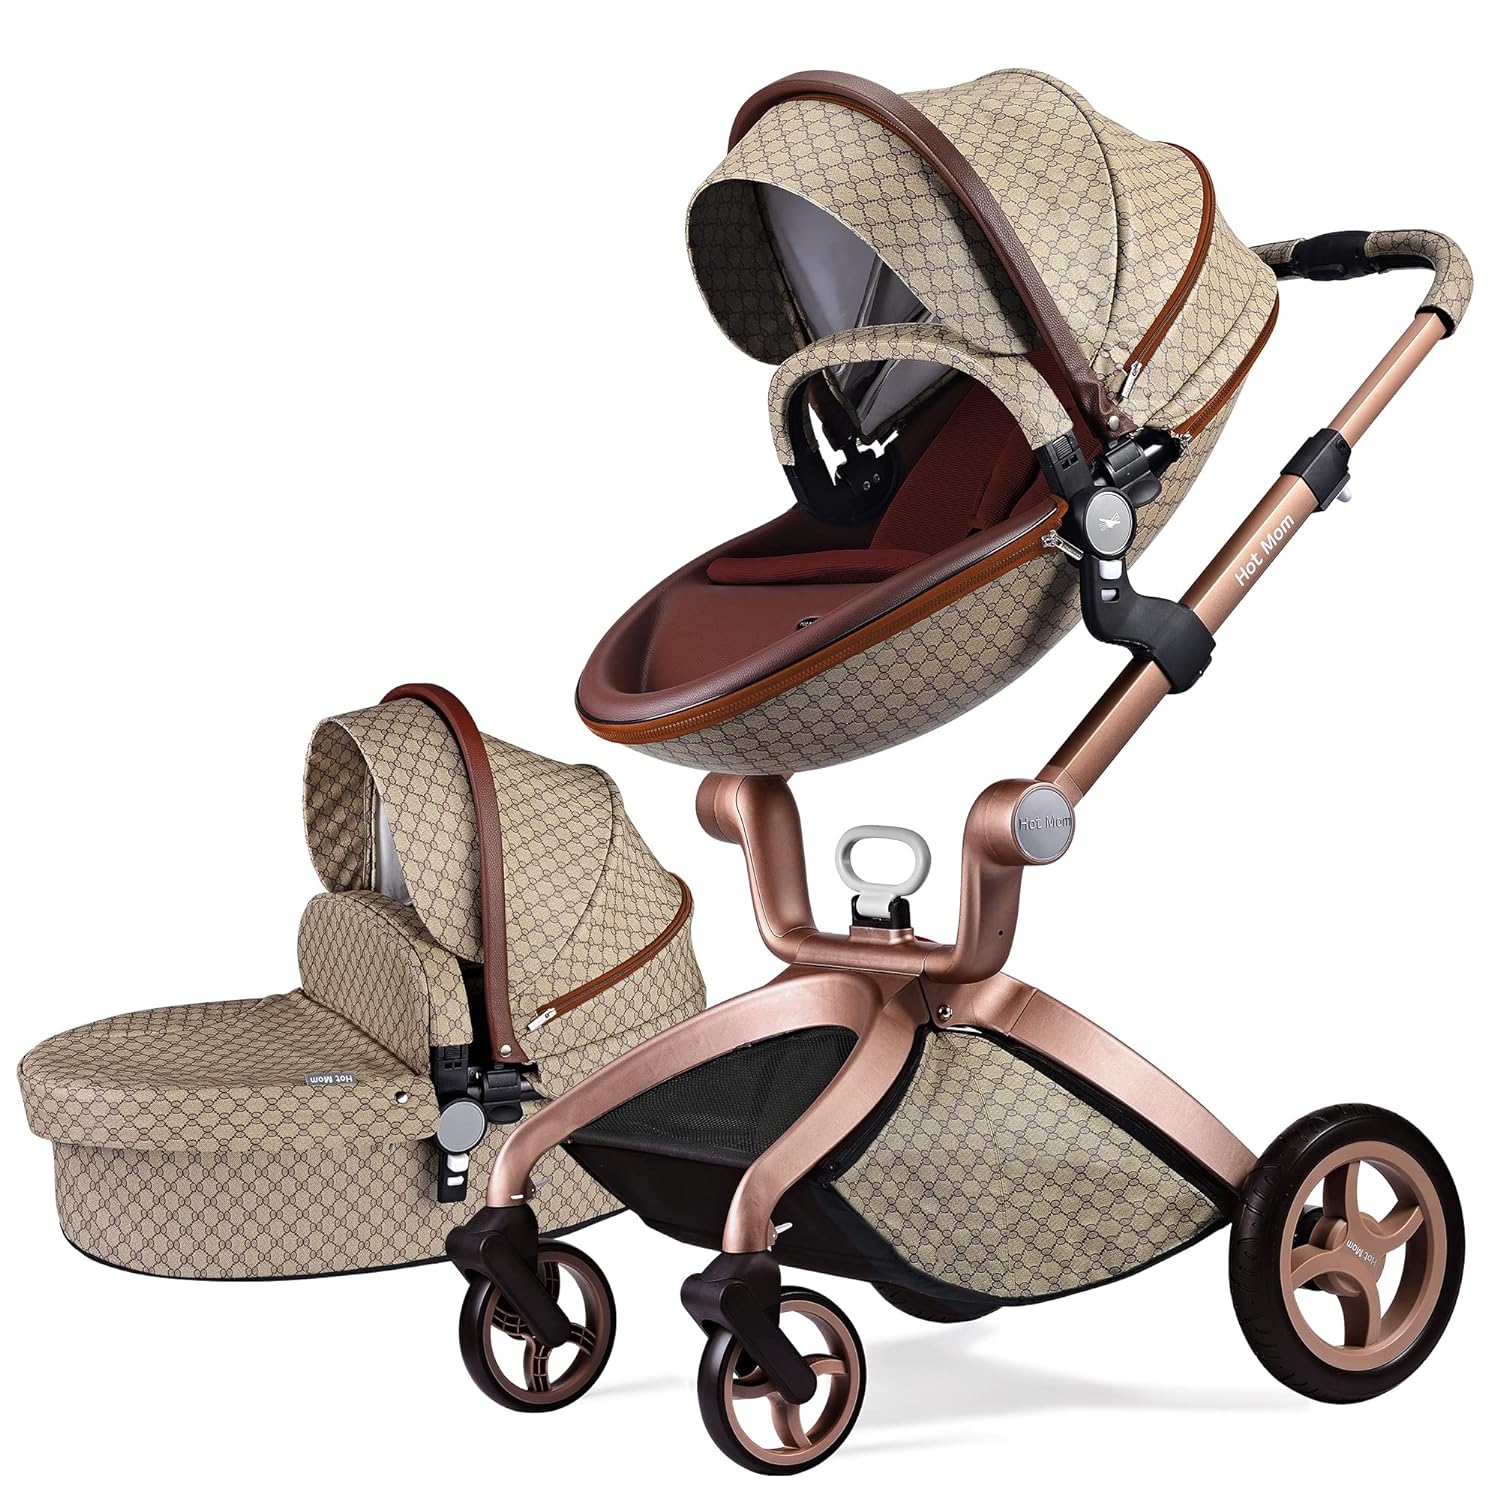 Baby Stroller: Height-Adjustable Seat and Reclining Baby Carriage with Four-Wheel Shock Absorption, Bidirectional, Elevated View, Stylish Stroller